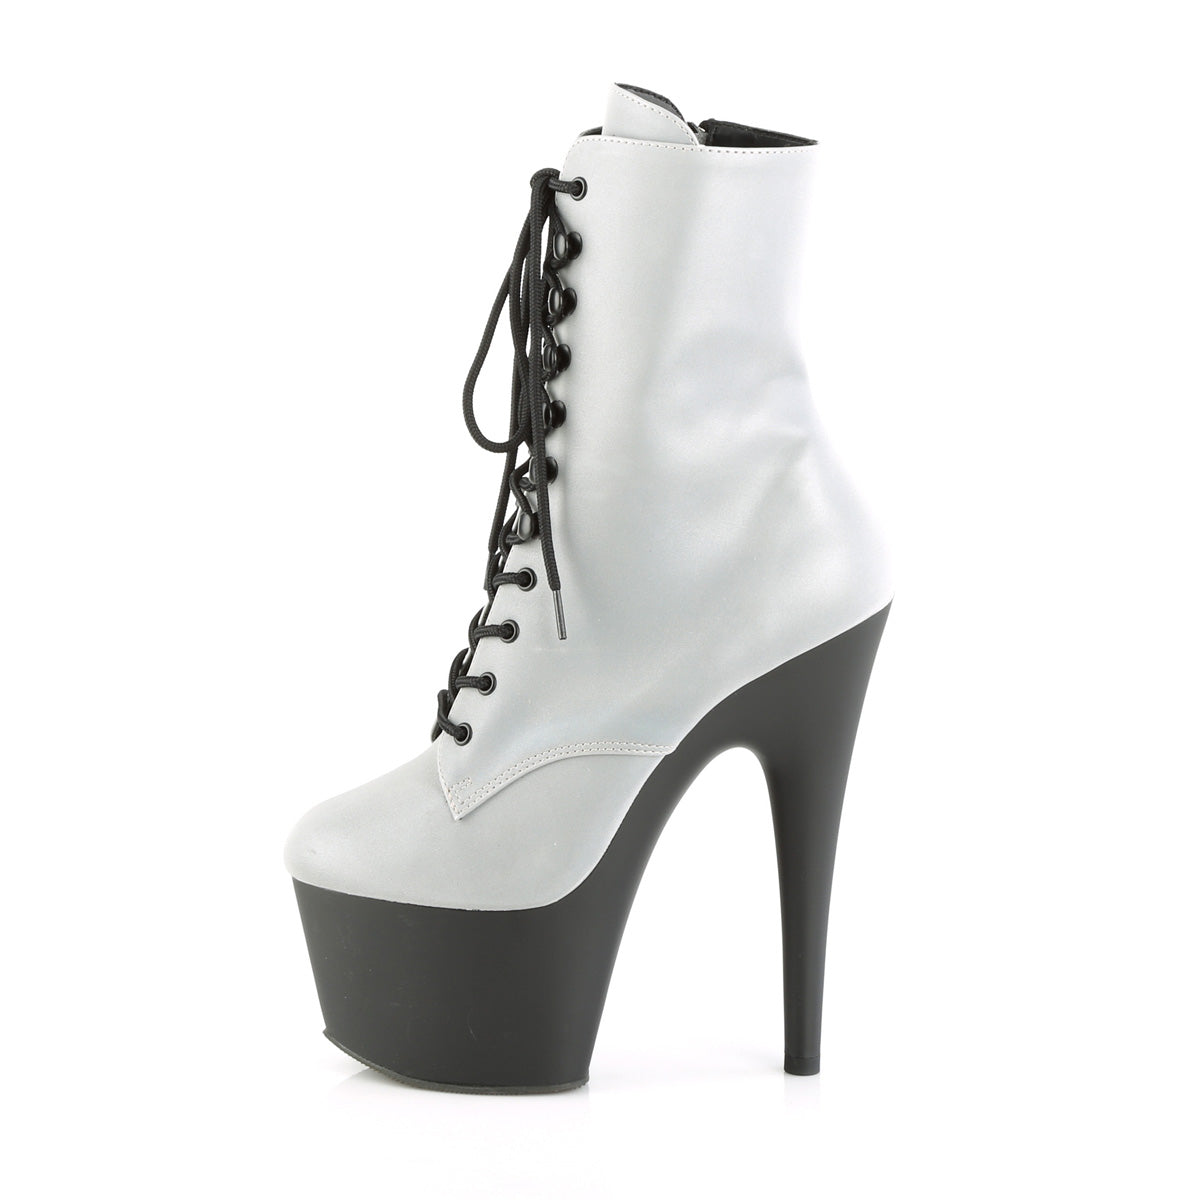 Pleaser Womens Ankle Boots ADORE-1020REFL Slv Reflective/Blk Matte